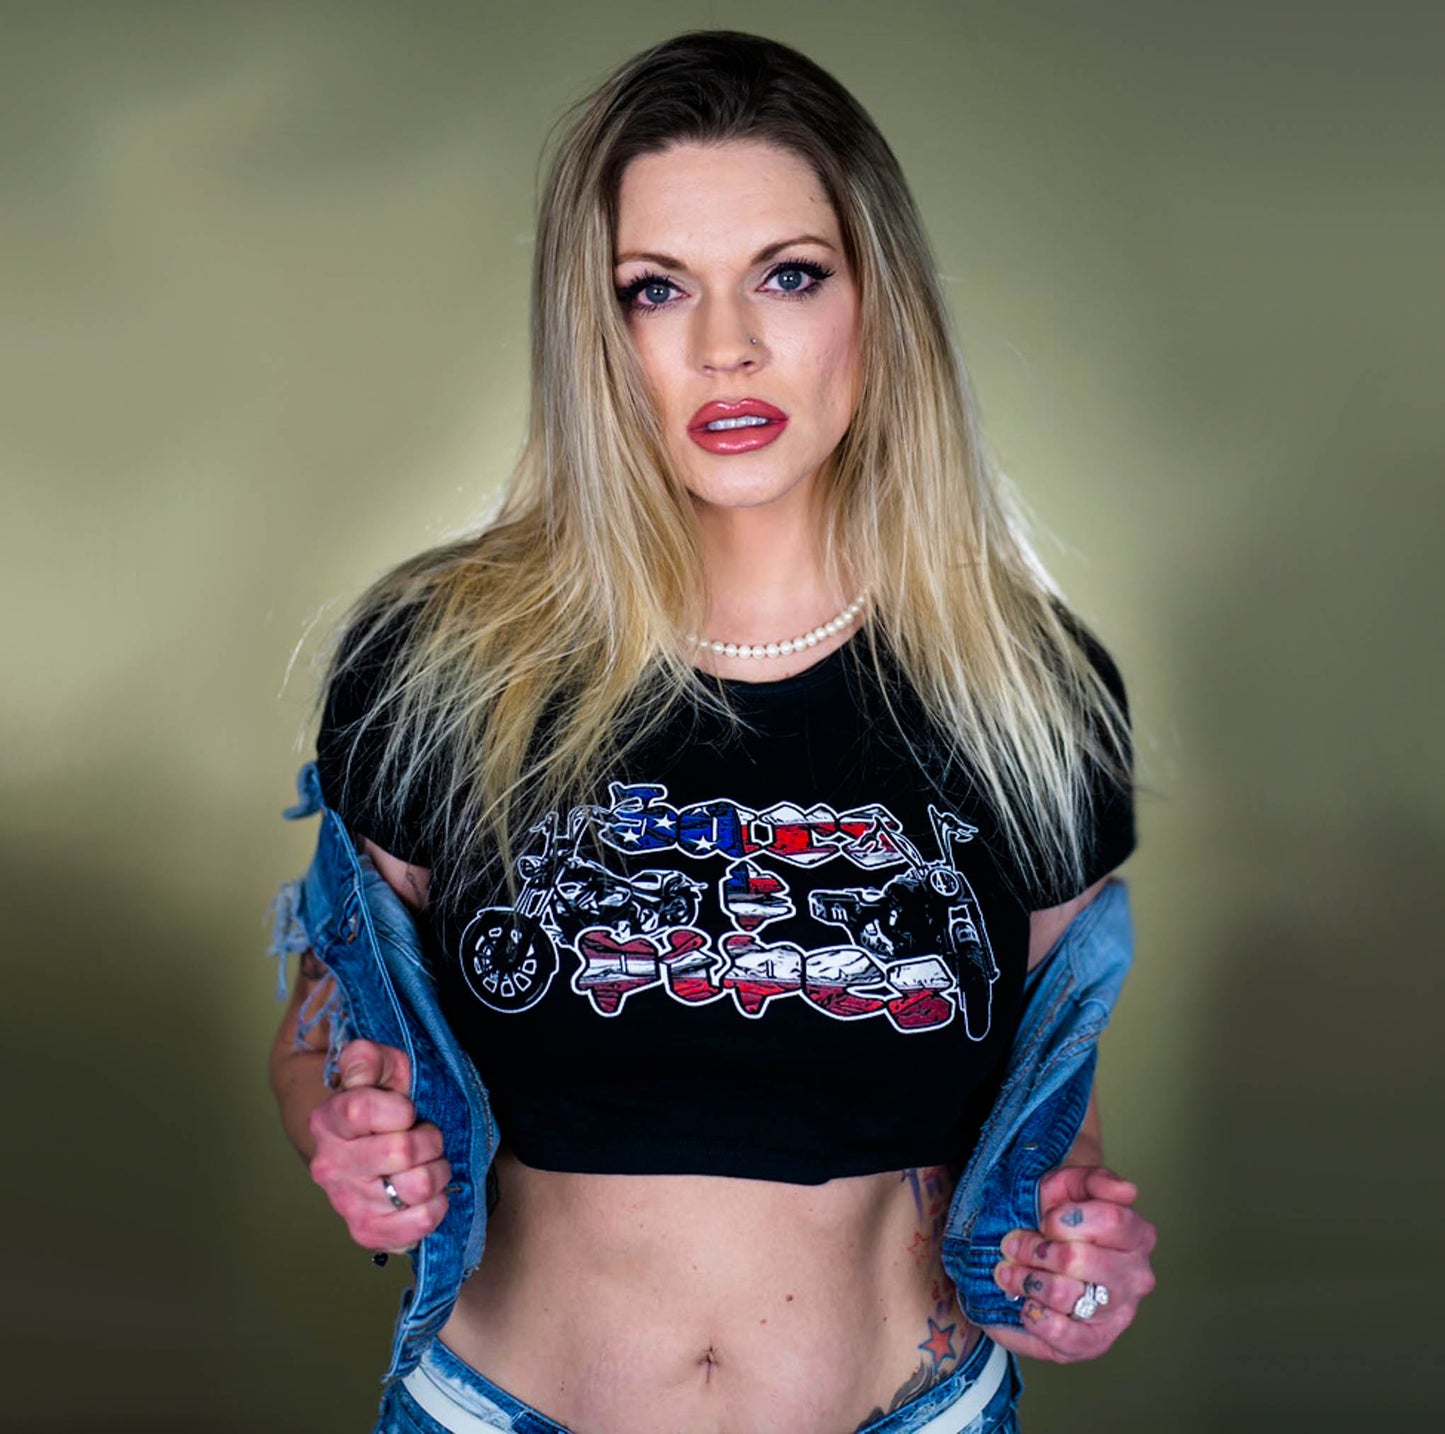 Blonde women wearing a Menace Clothing Bars & Pipes crop top in a jean jacket.